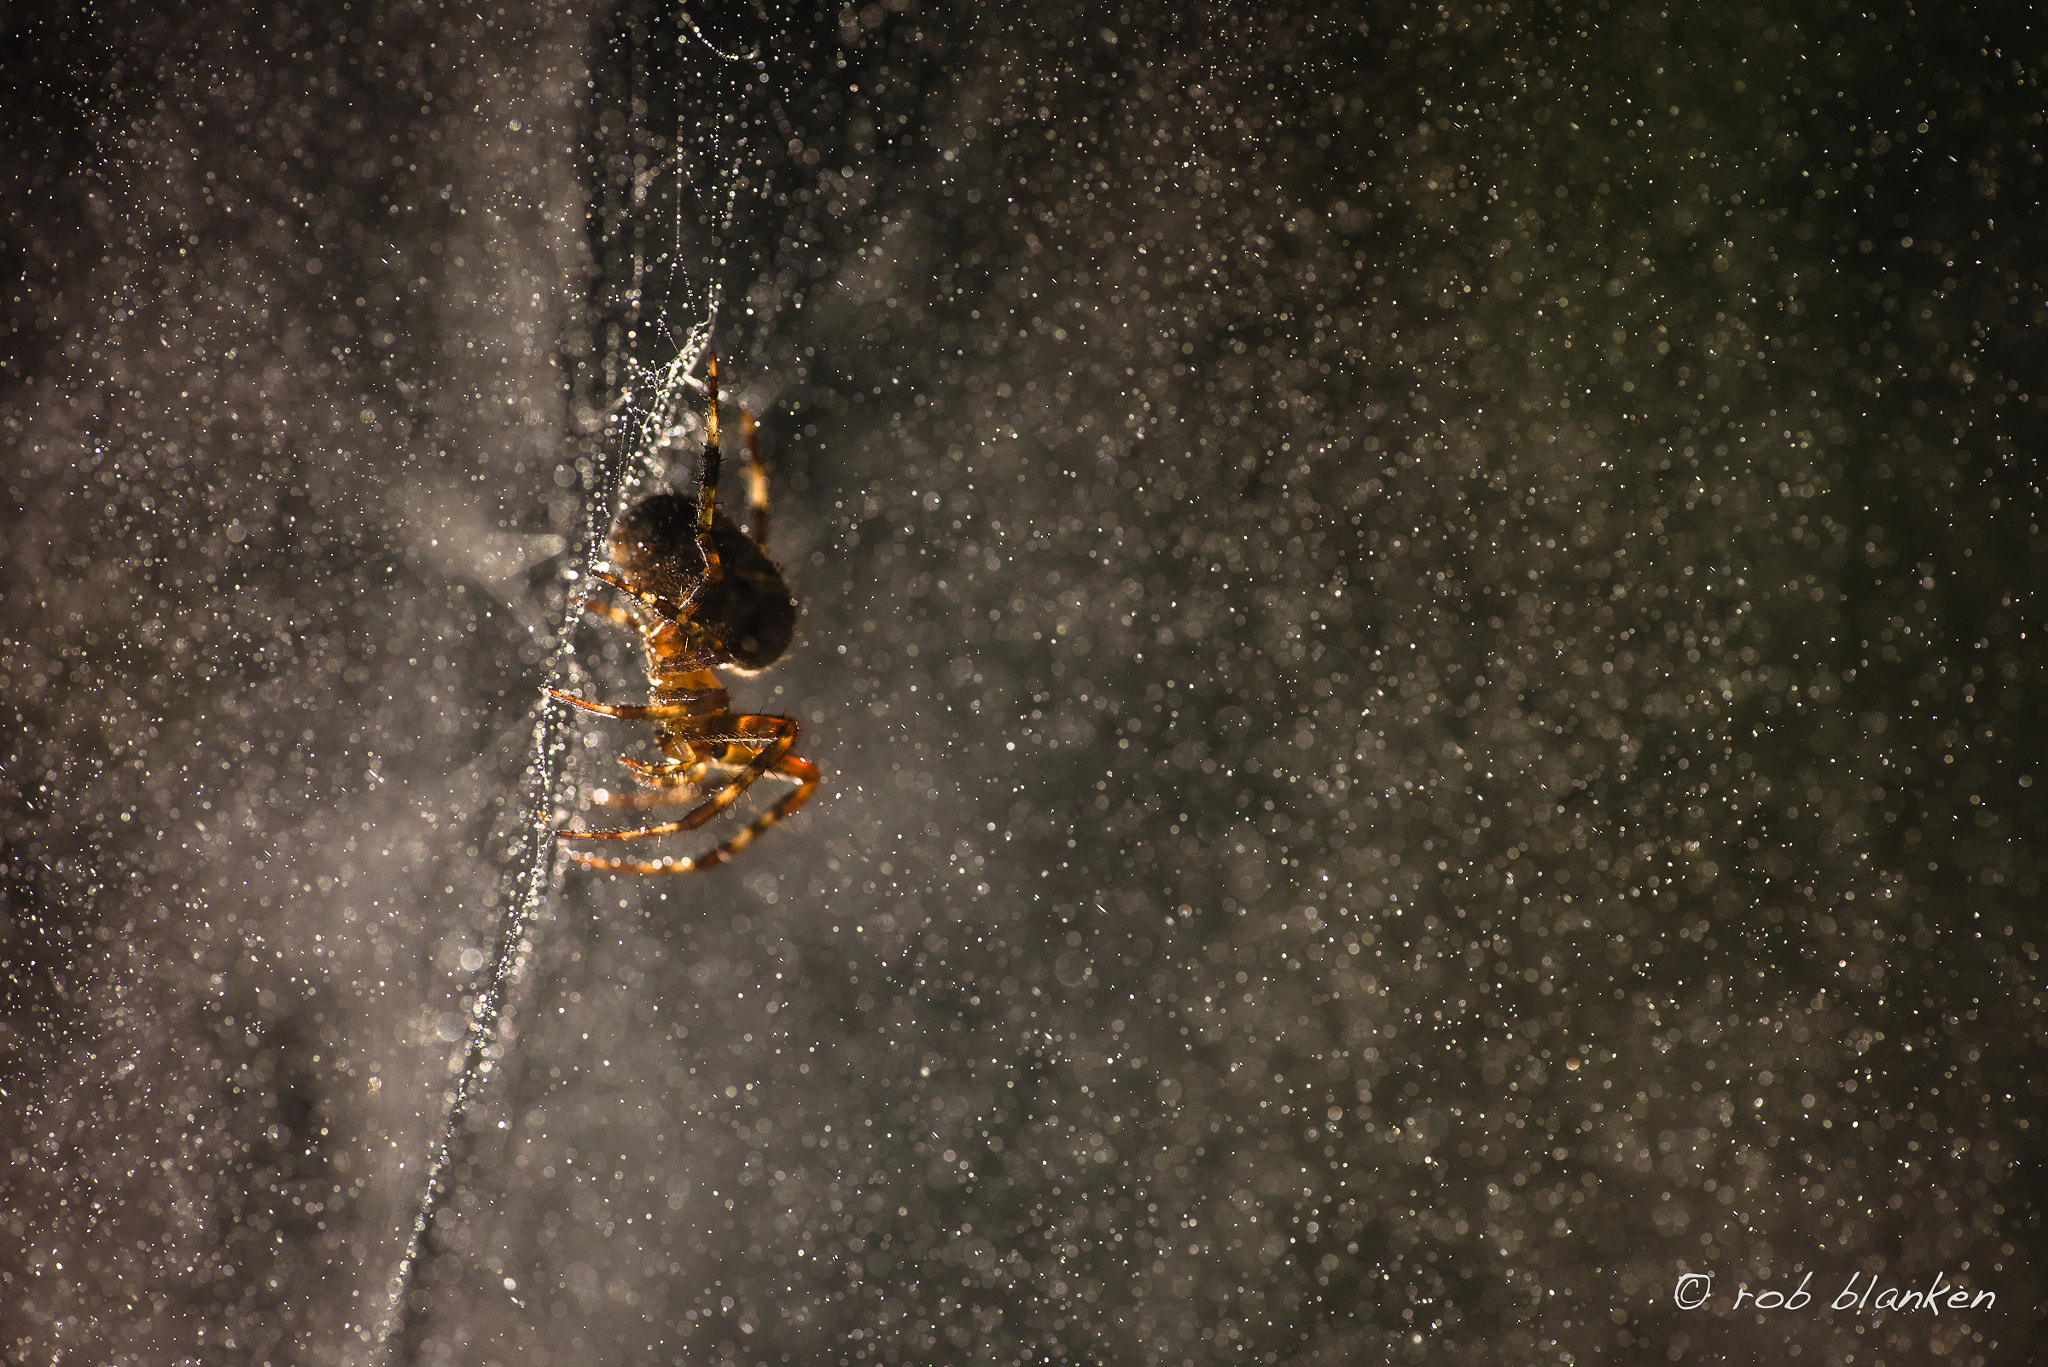 Nikon D810 sample photo. Space spider photography